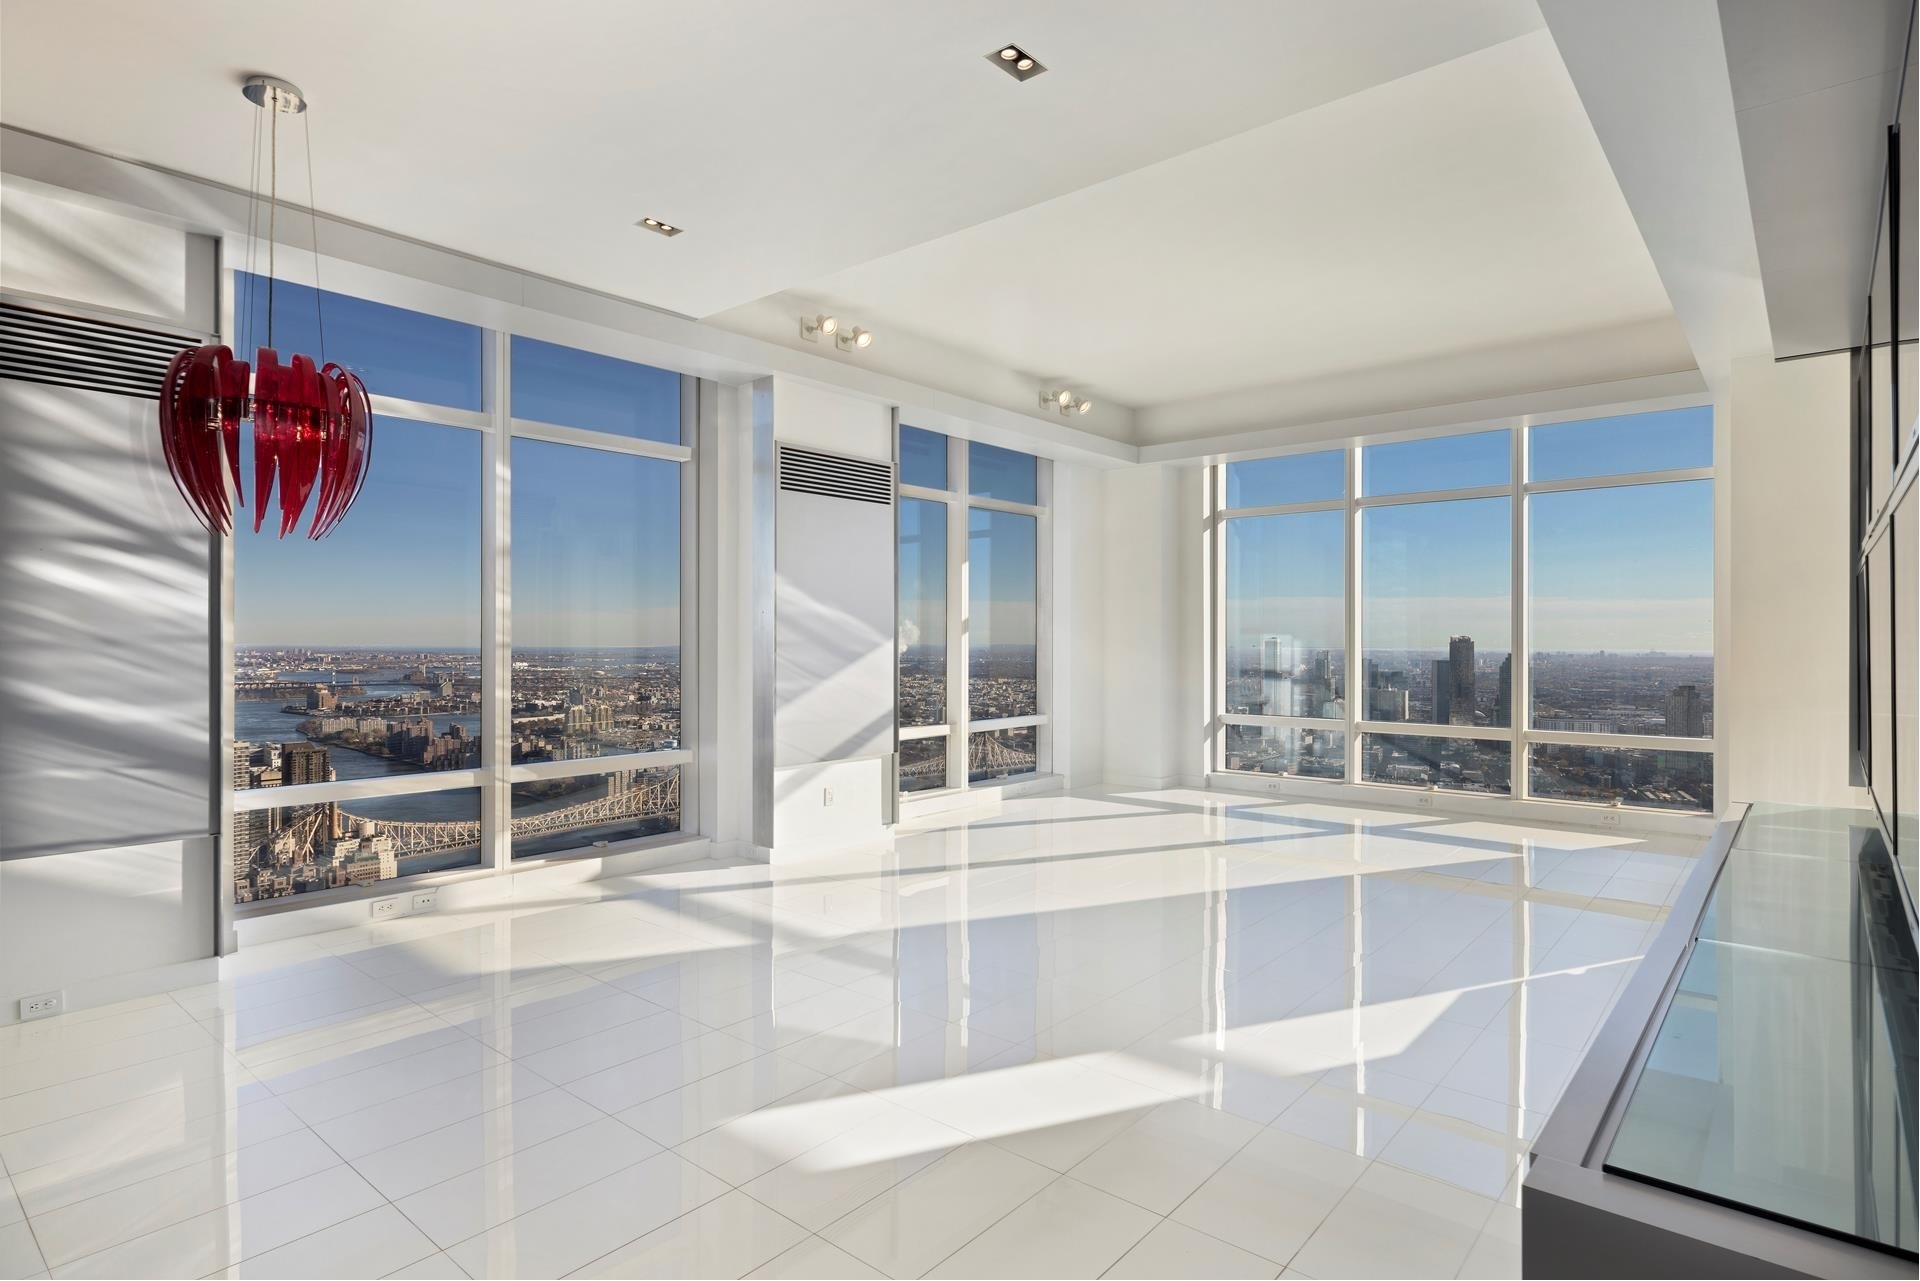 3. Condominiums for Sale at Trump World Tower, 845 UNITED NATIONS PLZ, 82A Turtle Bay, New York, NY 10017